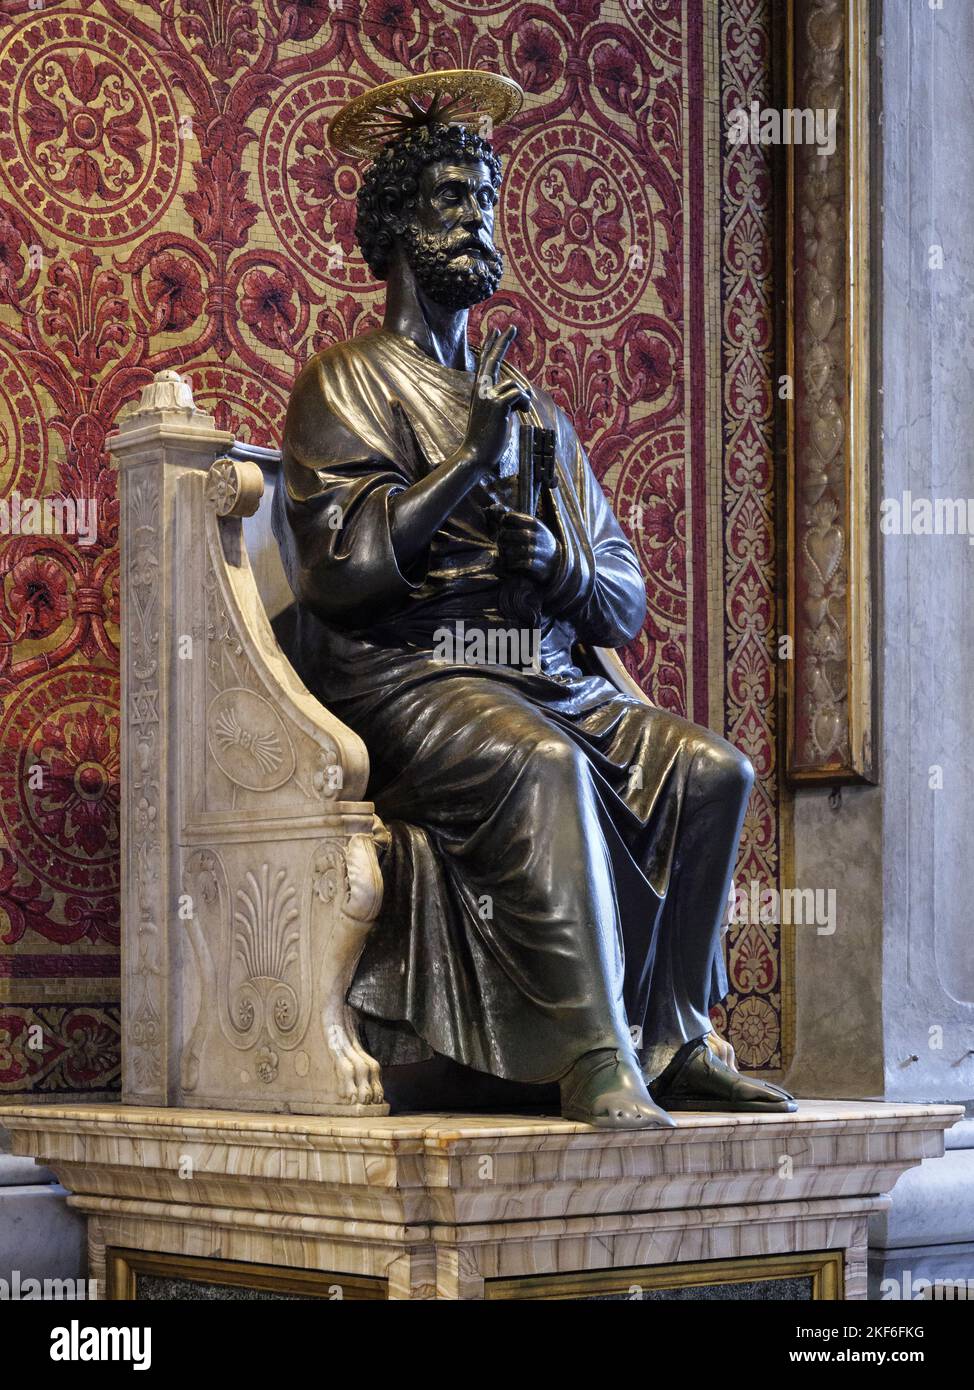 Rome. Italy. Basilica San Pietro (St. Peter’s Basilica). The bronze statue of Saint Peter holding the keys of heaven, attributed to Arnolfo di Cambio. Stock Photo